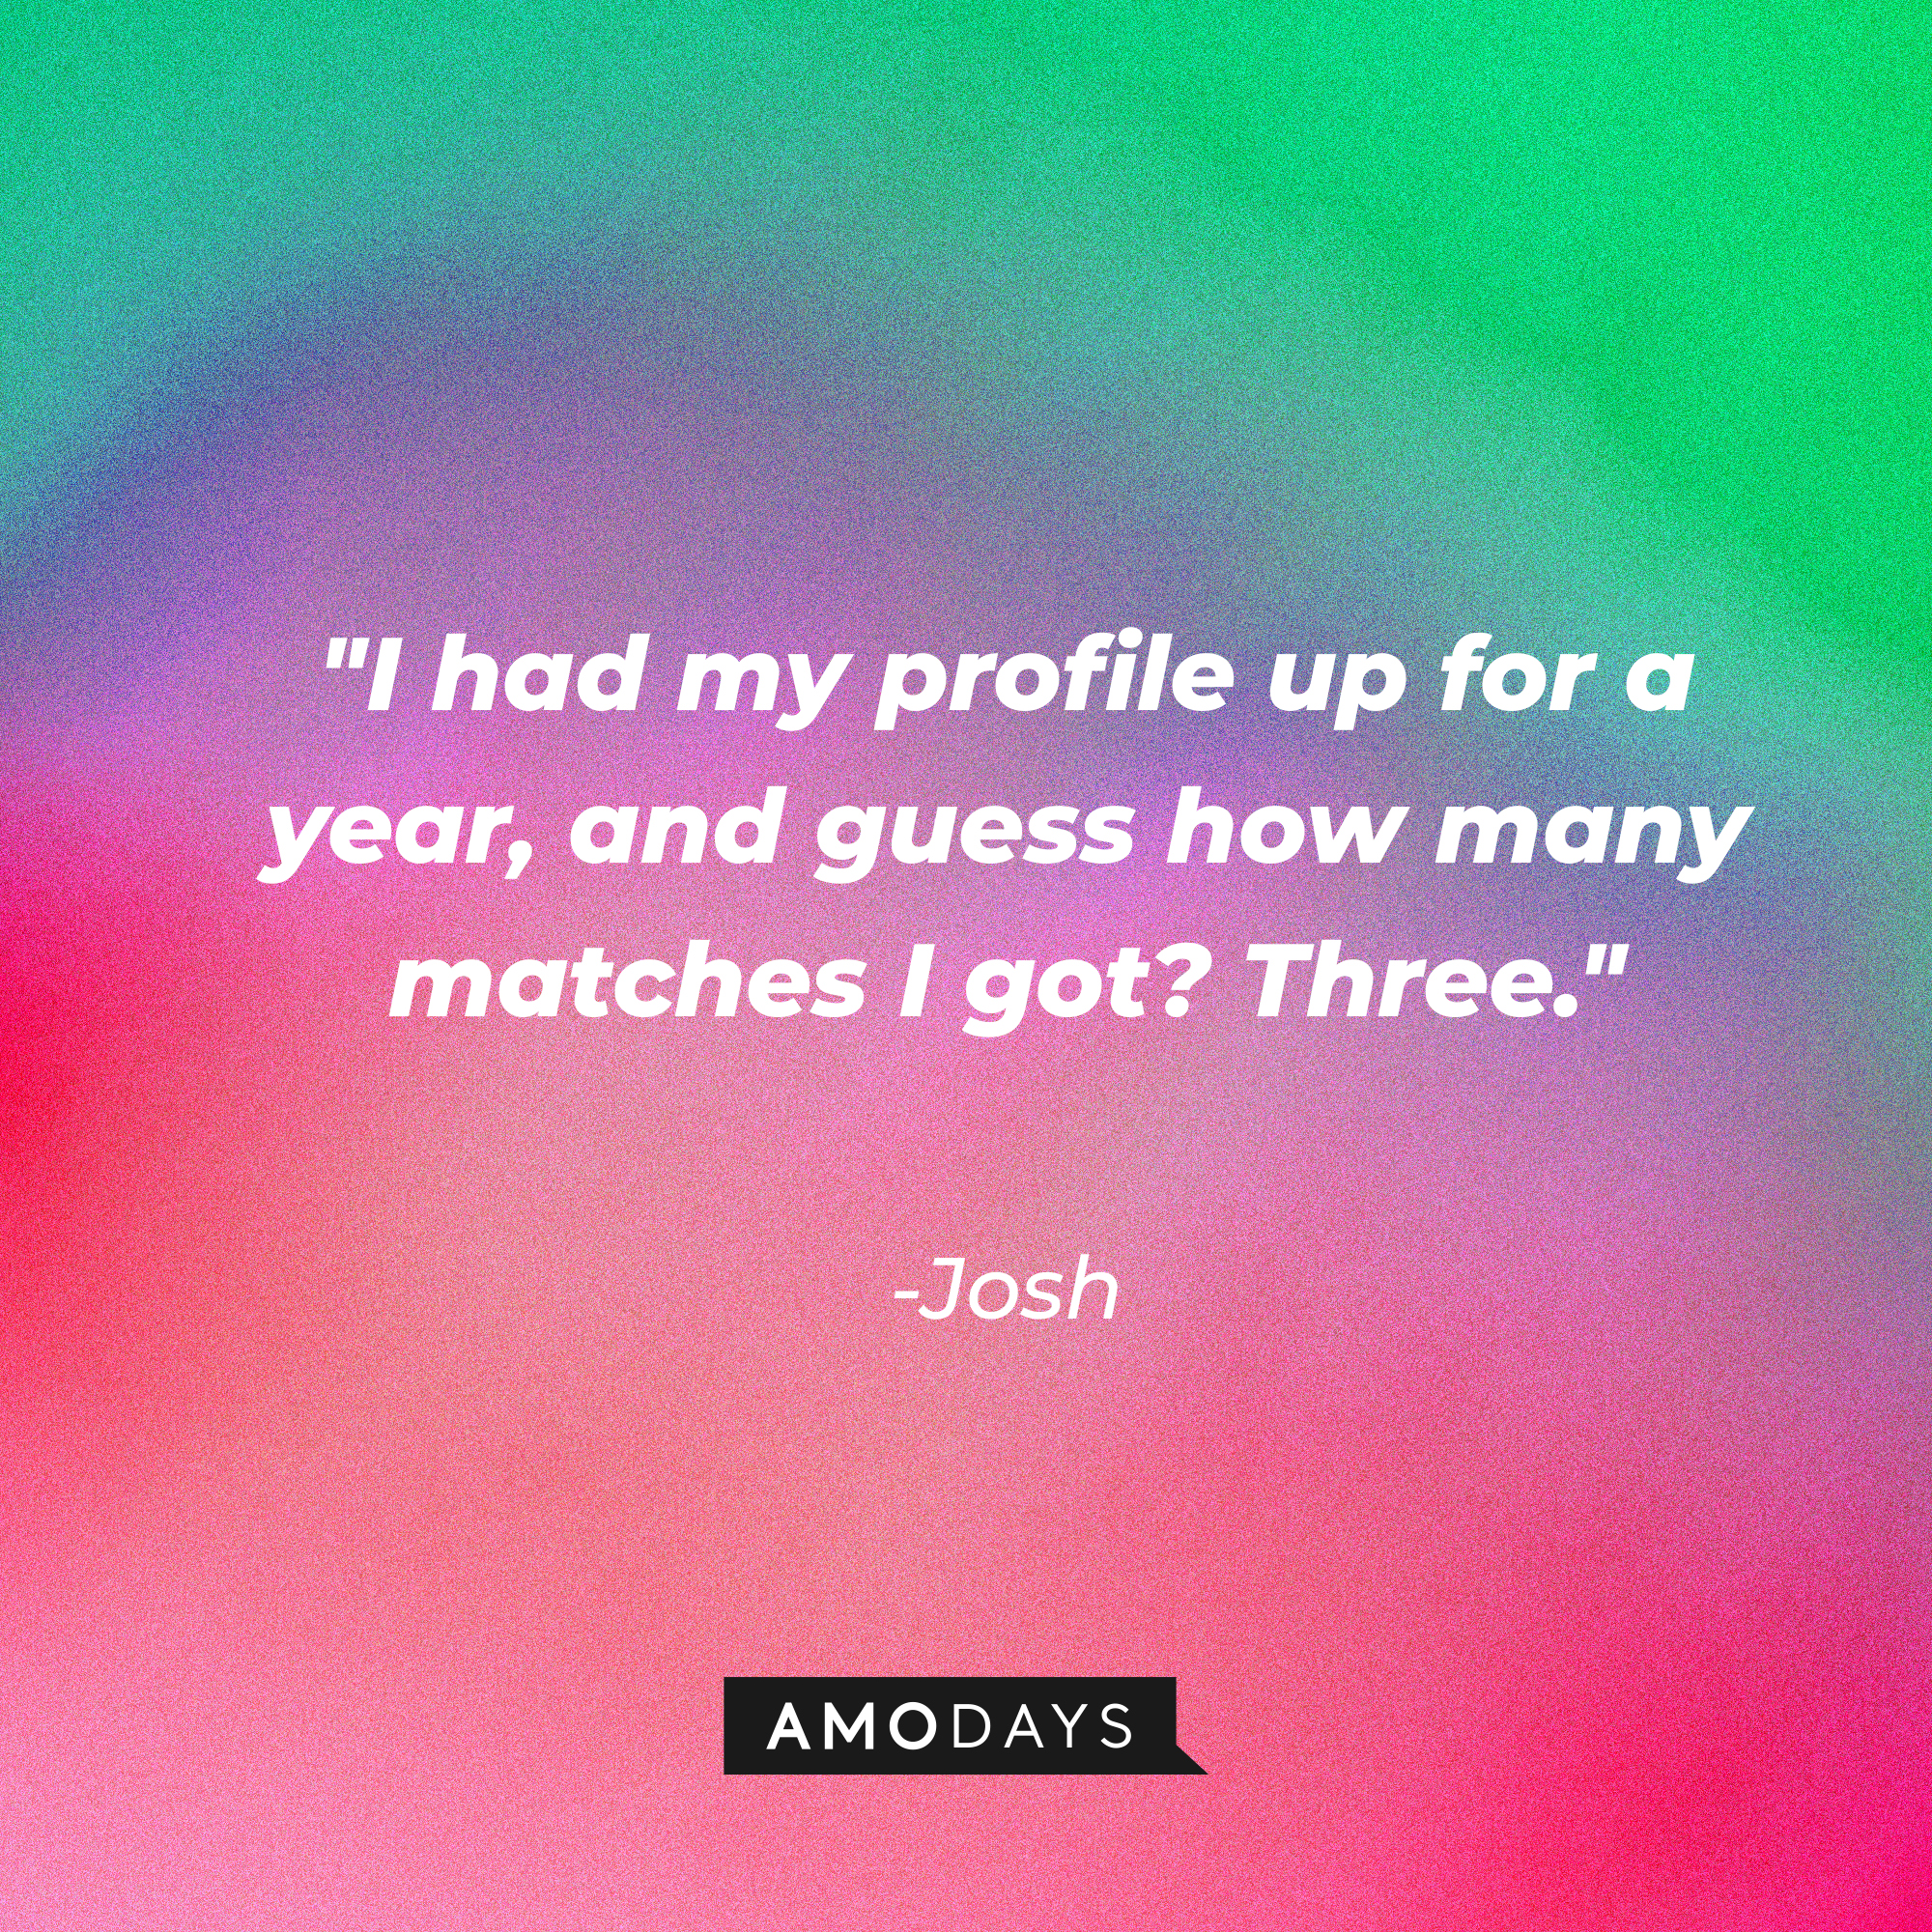 Josh’s quote: "I had my profile up for a year, and guess how many matches I got? Three.” | Source: AmoDays